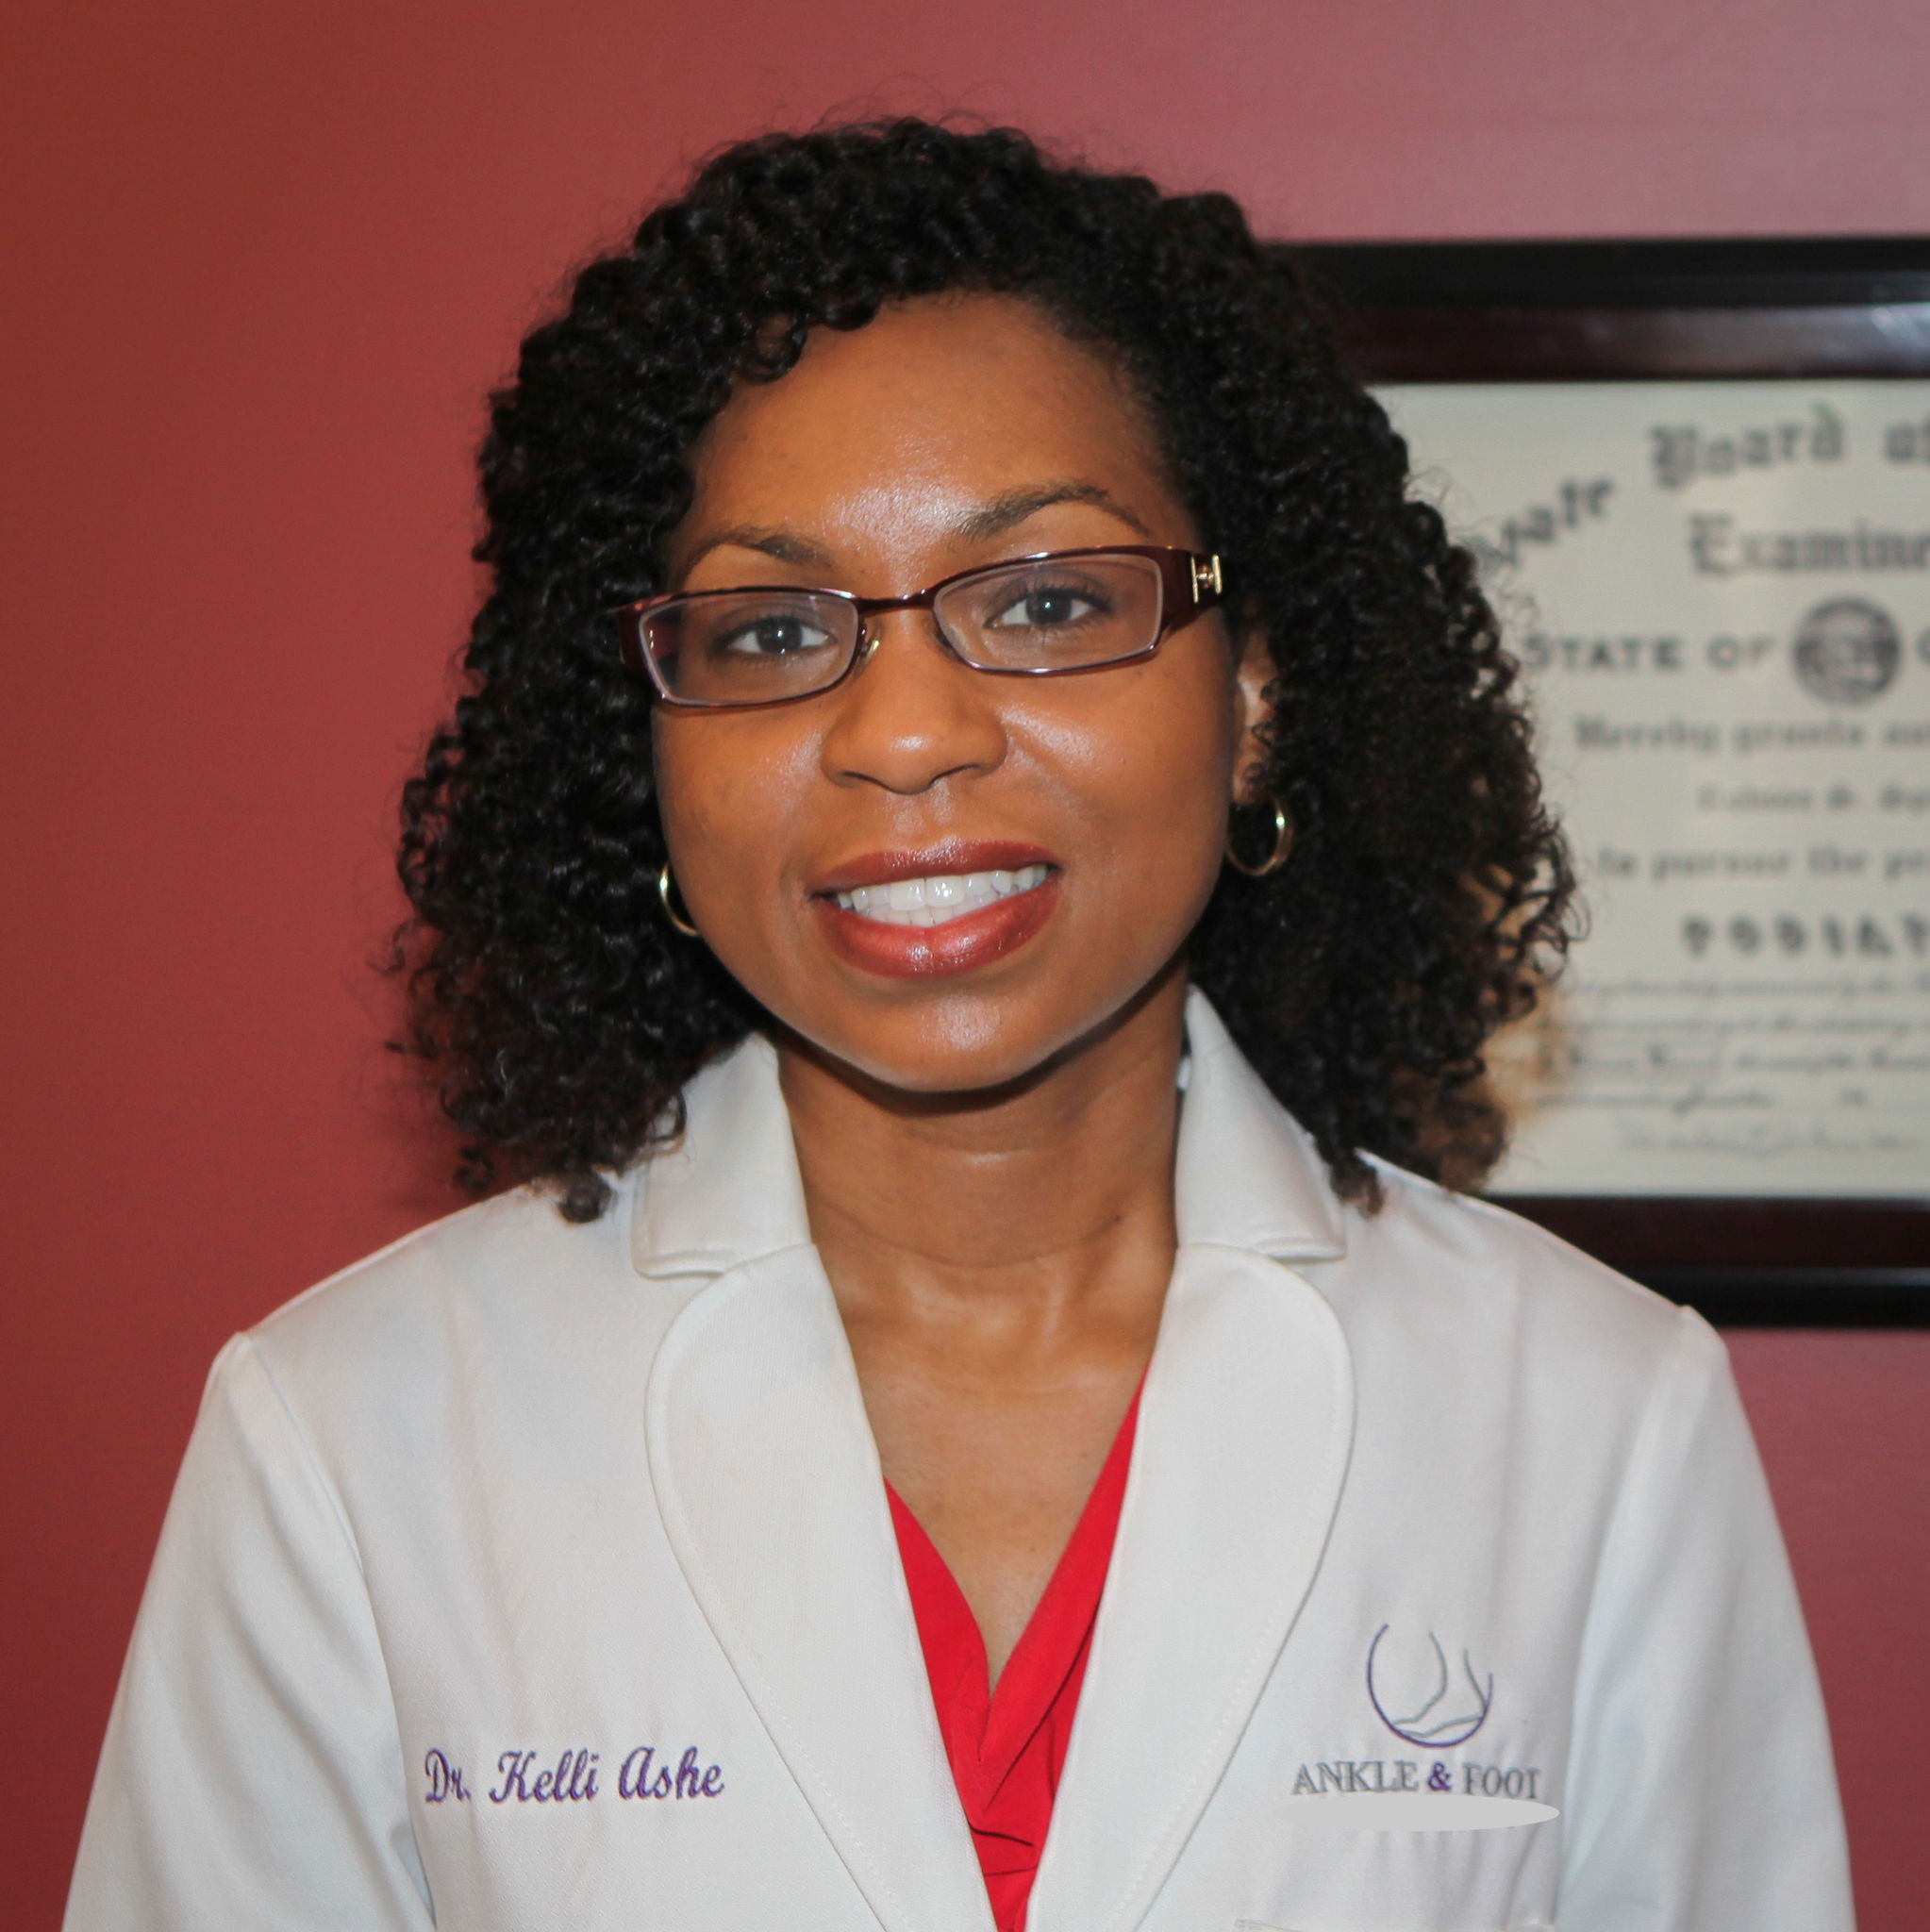 Dr. Kelli M. Ashe, DPM, Podiatrist (Foot and Ankle Specialist)